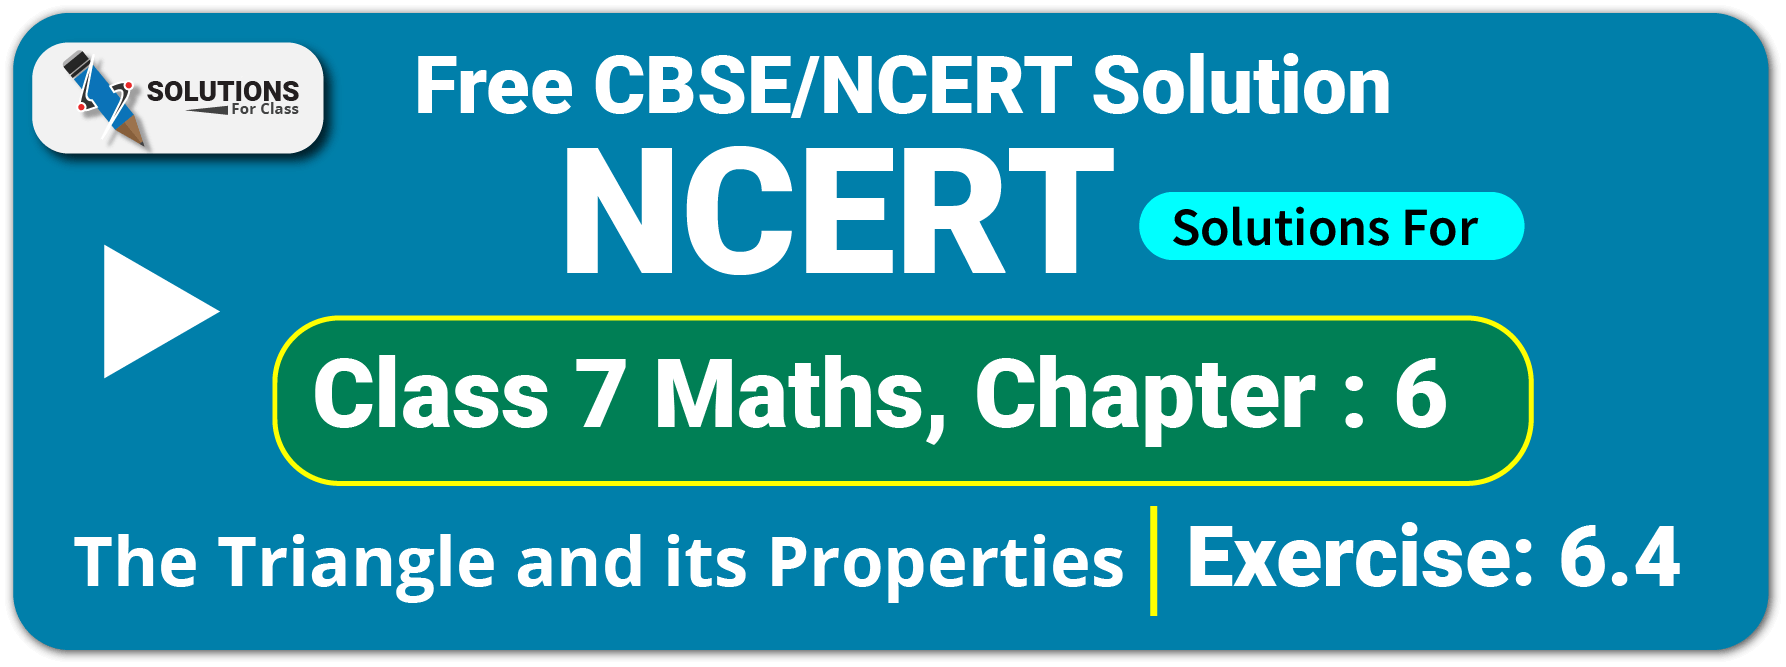 NCERT Solutions Class 7 Maths Chapter 6 The Triangle and its Properties Exe.6.4